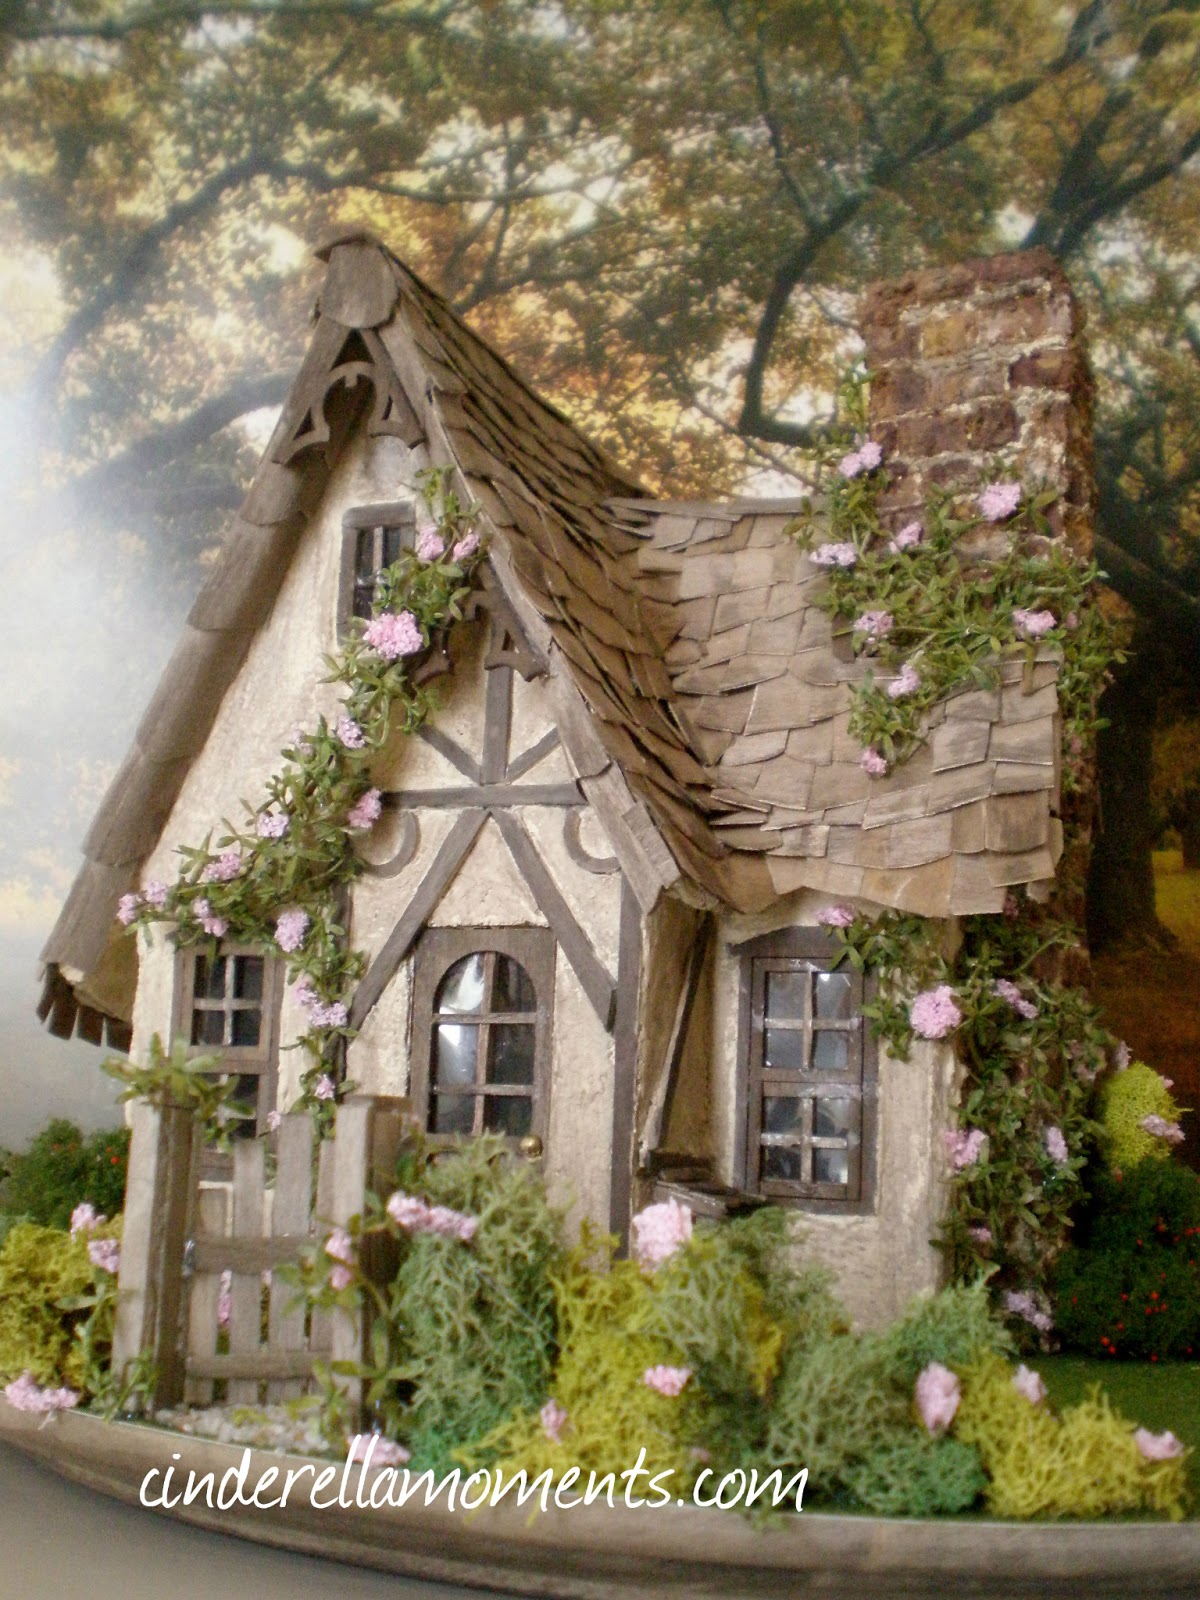 Cinderella Moments: Miss Read's English Cottage